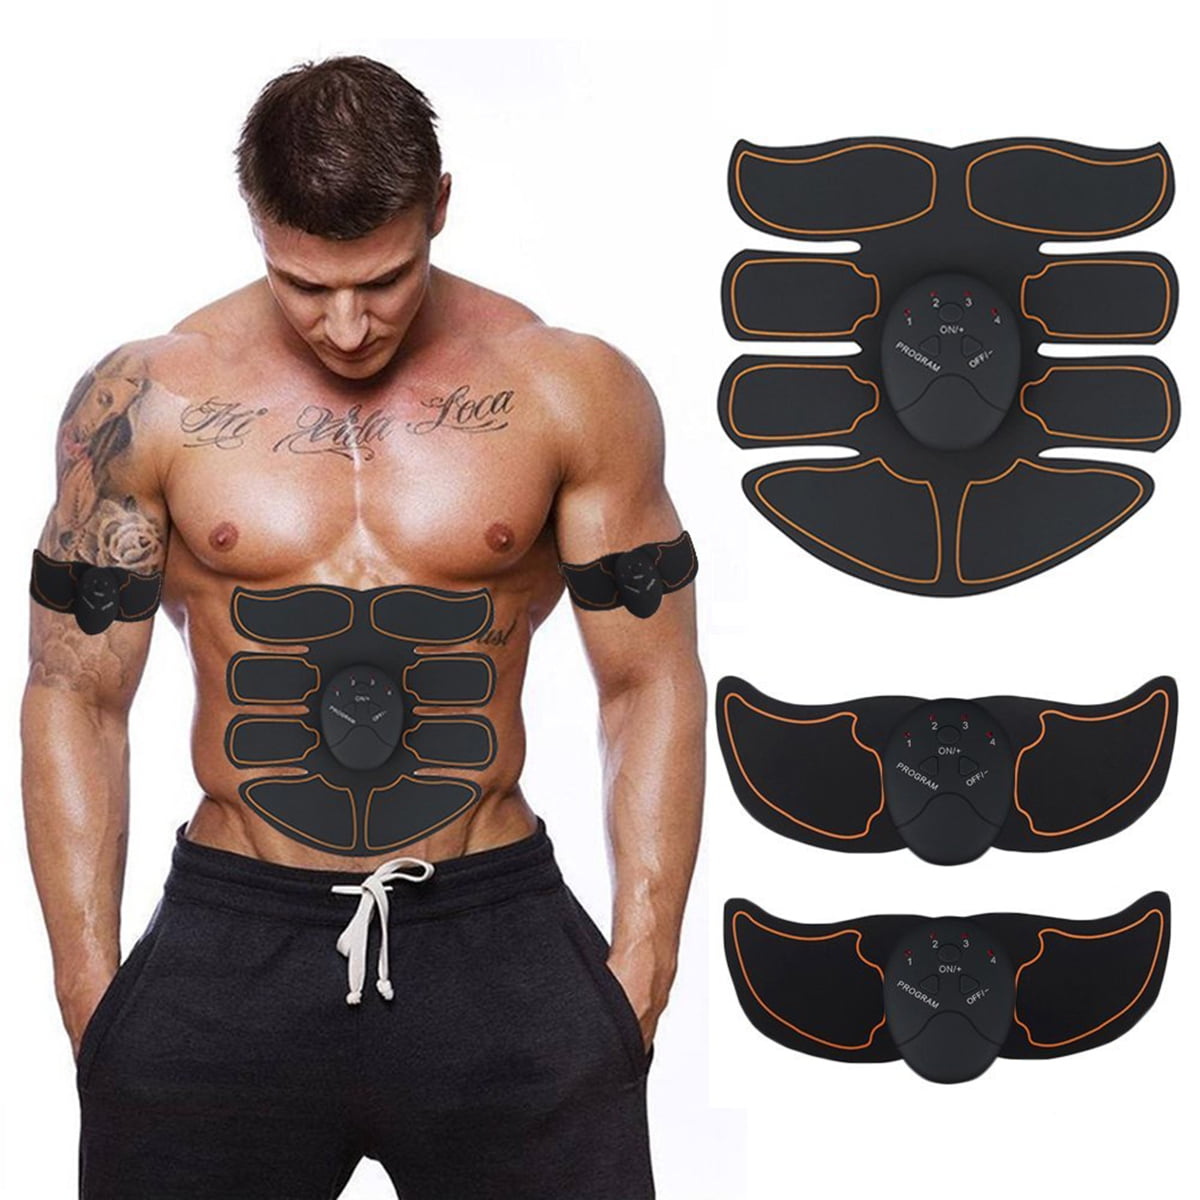 EMS Abdominal Muscle Training Gear ABS Shape Trainer Fit Body Exercise Fitness 